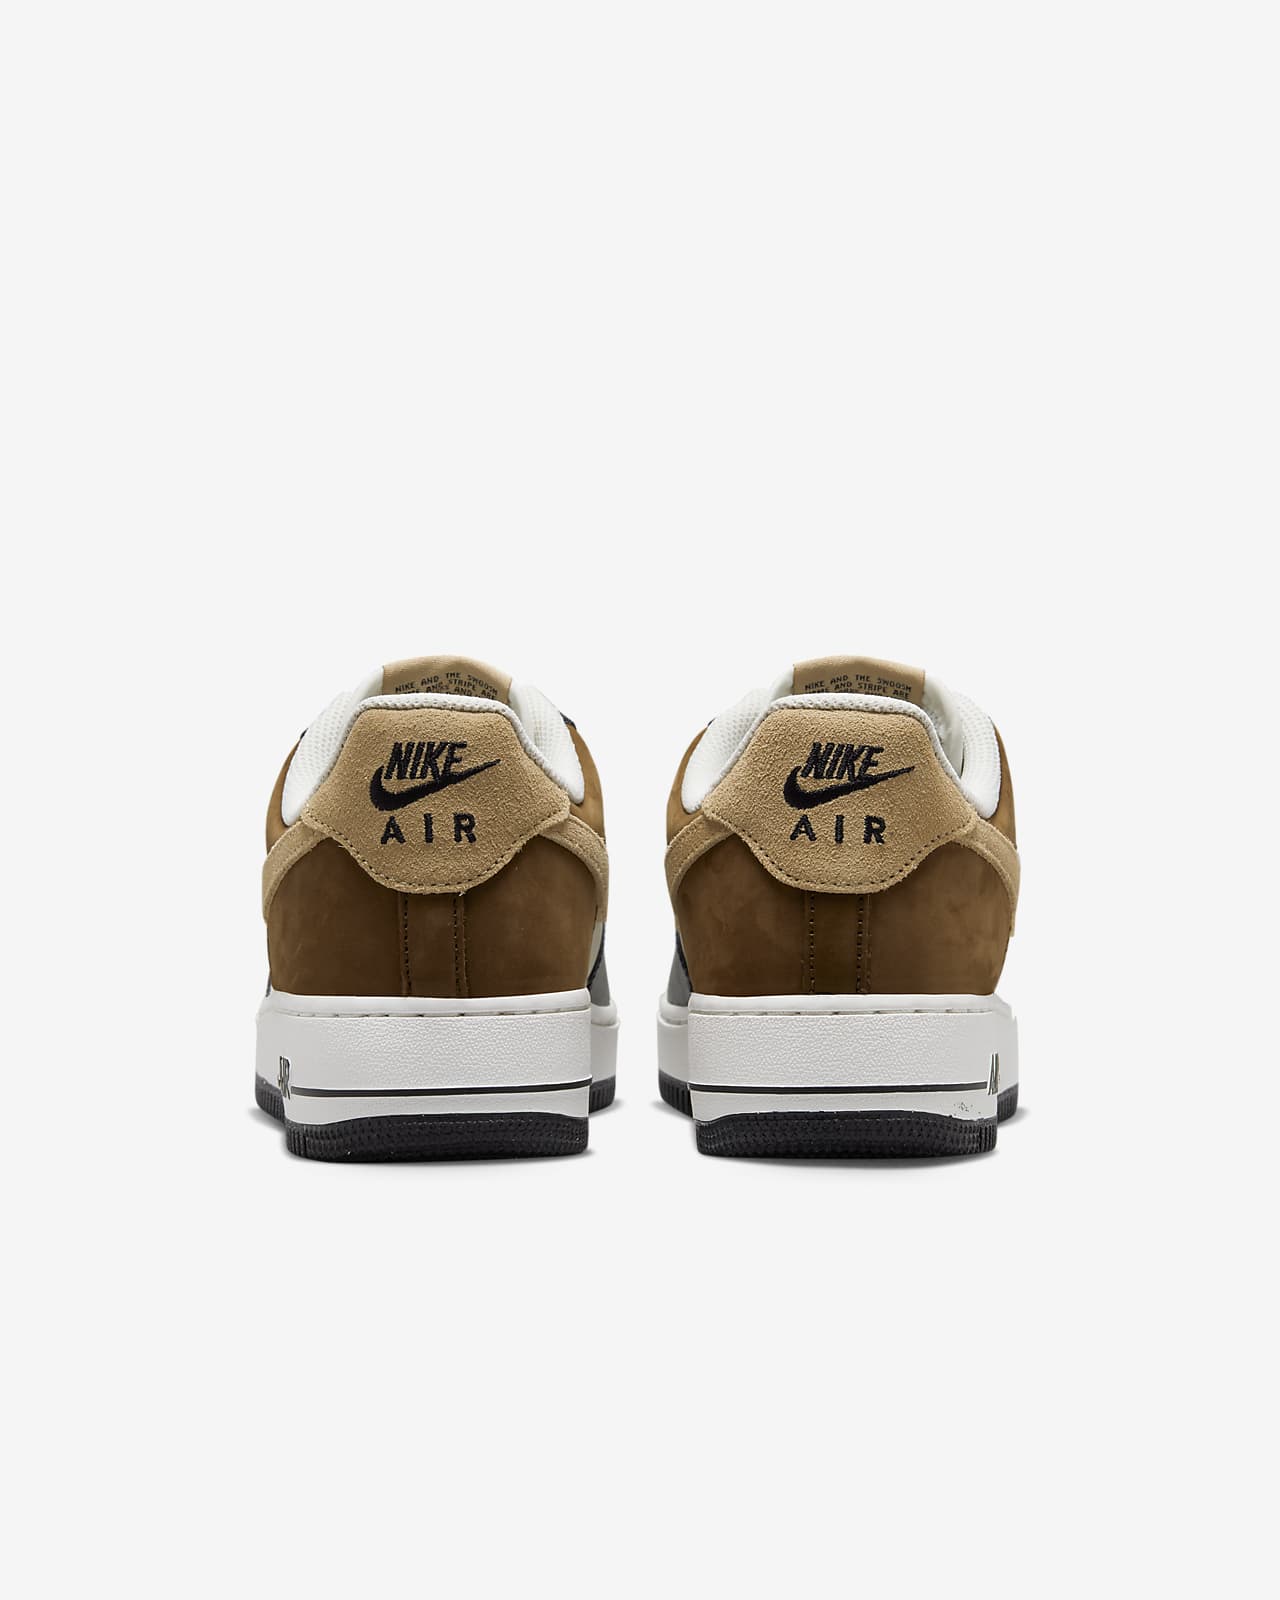 Nike Air Force 1 '07 is available online and in-store.⁠ ⁠ Tap the link in  bio to shop now.⁠ ⁠ #thegoodlifespace #nike #af1⁠